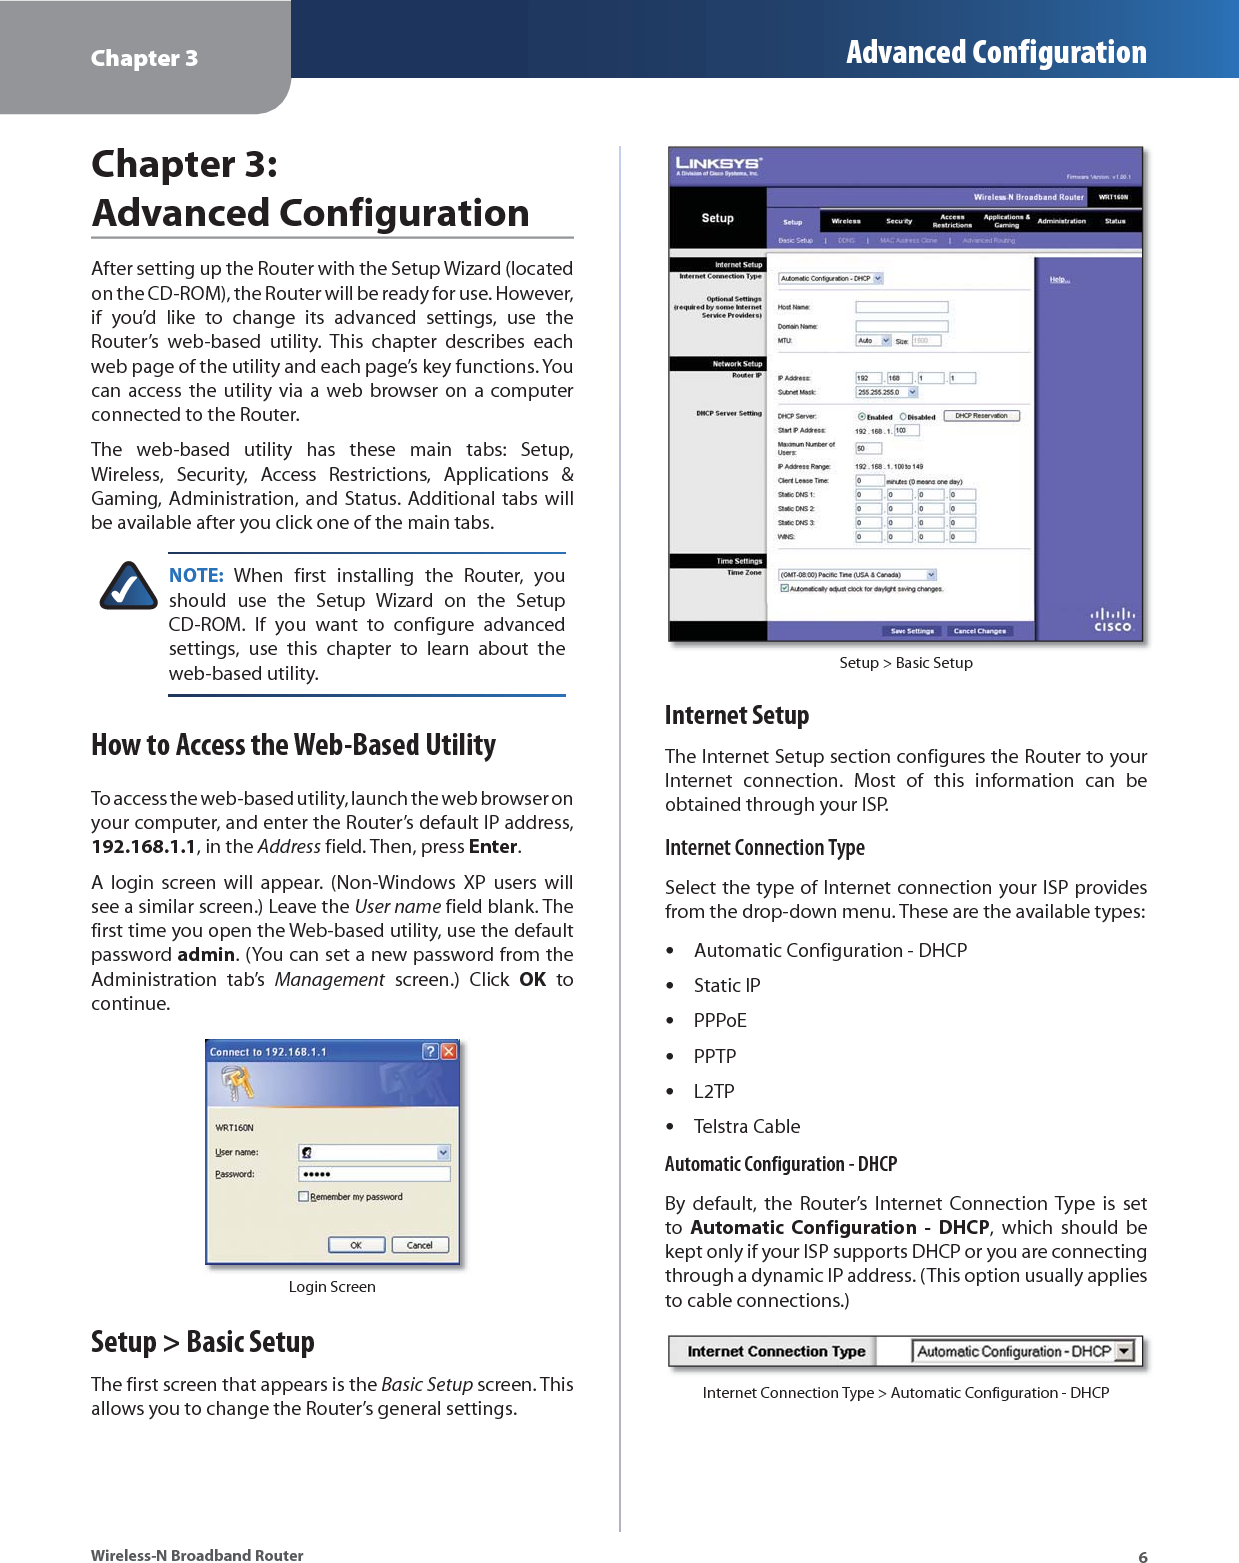 Chapter 3 Advanced Configuration6Wireless-N Broadband RouterChapter 3: Advanced ConfigurationAfter setting up the Router with the Setup Wizard (located on the CD-ROM), the Router will be ready for use. However, if you’d like to change its advanced settings, use the Router’s web-based utility. This chapter describes each web page of the utility and each page’s key functions. You can access the utility via a web browser on a computer connected to the Router.The web-based utility has these main tabs: Setup, Wireless, Security, Access Restrictions, Applications &amp; Gaming, Administration, and Status. Additional tabs will be available after you click one of the main tabs.NOTE: When first installing the Router, you should use the Setup Wizard on the Setup CD-ROM. If you want to configure advanced settings, use this chapter to learn about the web-based utility.How to Access the Web-Based UtilityTo access the web-based utility, launch the web browser on your computer, and enter the Router’s default IP address, 192.168.1.1, in the Address field. Then, press Enter.A login screen will appear. (Non-Windows XP users will see a similar screen.) Leave the User name field blank. The first time you open the Web-based utility, use the default password admin. (You can set a new password from the Administration tab’s Management screen.) Click OK to continue.Login ScreenSetup &gt; Basic SetupThe first screen that appears is the Basic Setup screen. This allows you to change the Router’s general settings. Setup &gt; Basic SetupInternet SetupThe Internet Setup section configures the Router to your Internet connection. Most of this information can be obtained through your ISP.Internet Connection TypeSelect the type of Internet connection your ISP provides from the drop-down menu. These are the available types:Automatic Configuration - DHCPStatic IPPPPoEPPTPL2TPTelstra CableAutomatic Configuration - DHCPBy default, the Router’s Internet Connection Type is set to  Automatic Configuration - DHCP, which should be kept only if your ISP supports DHCP or you are connecting through a dynamic IP address. (This option usually applies to cable connections.)Internet Connection Type &gt; Automatic Configuration - DHCP••••••